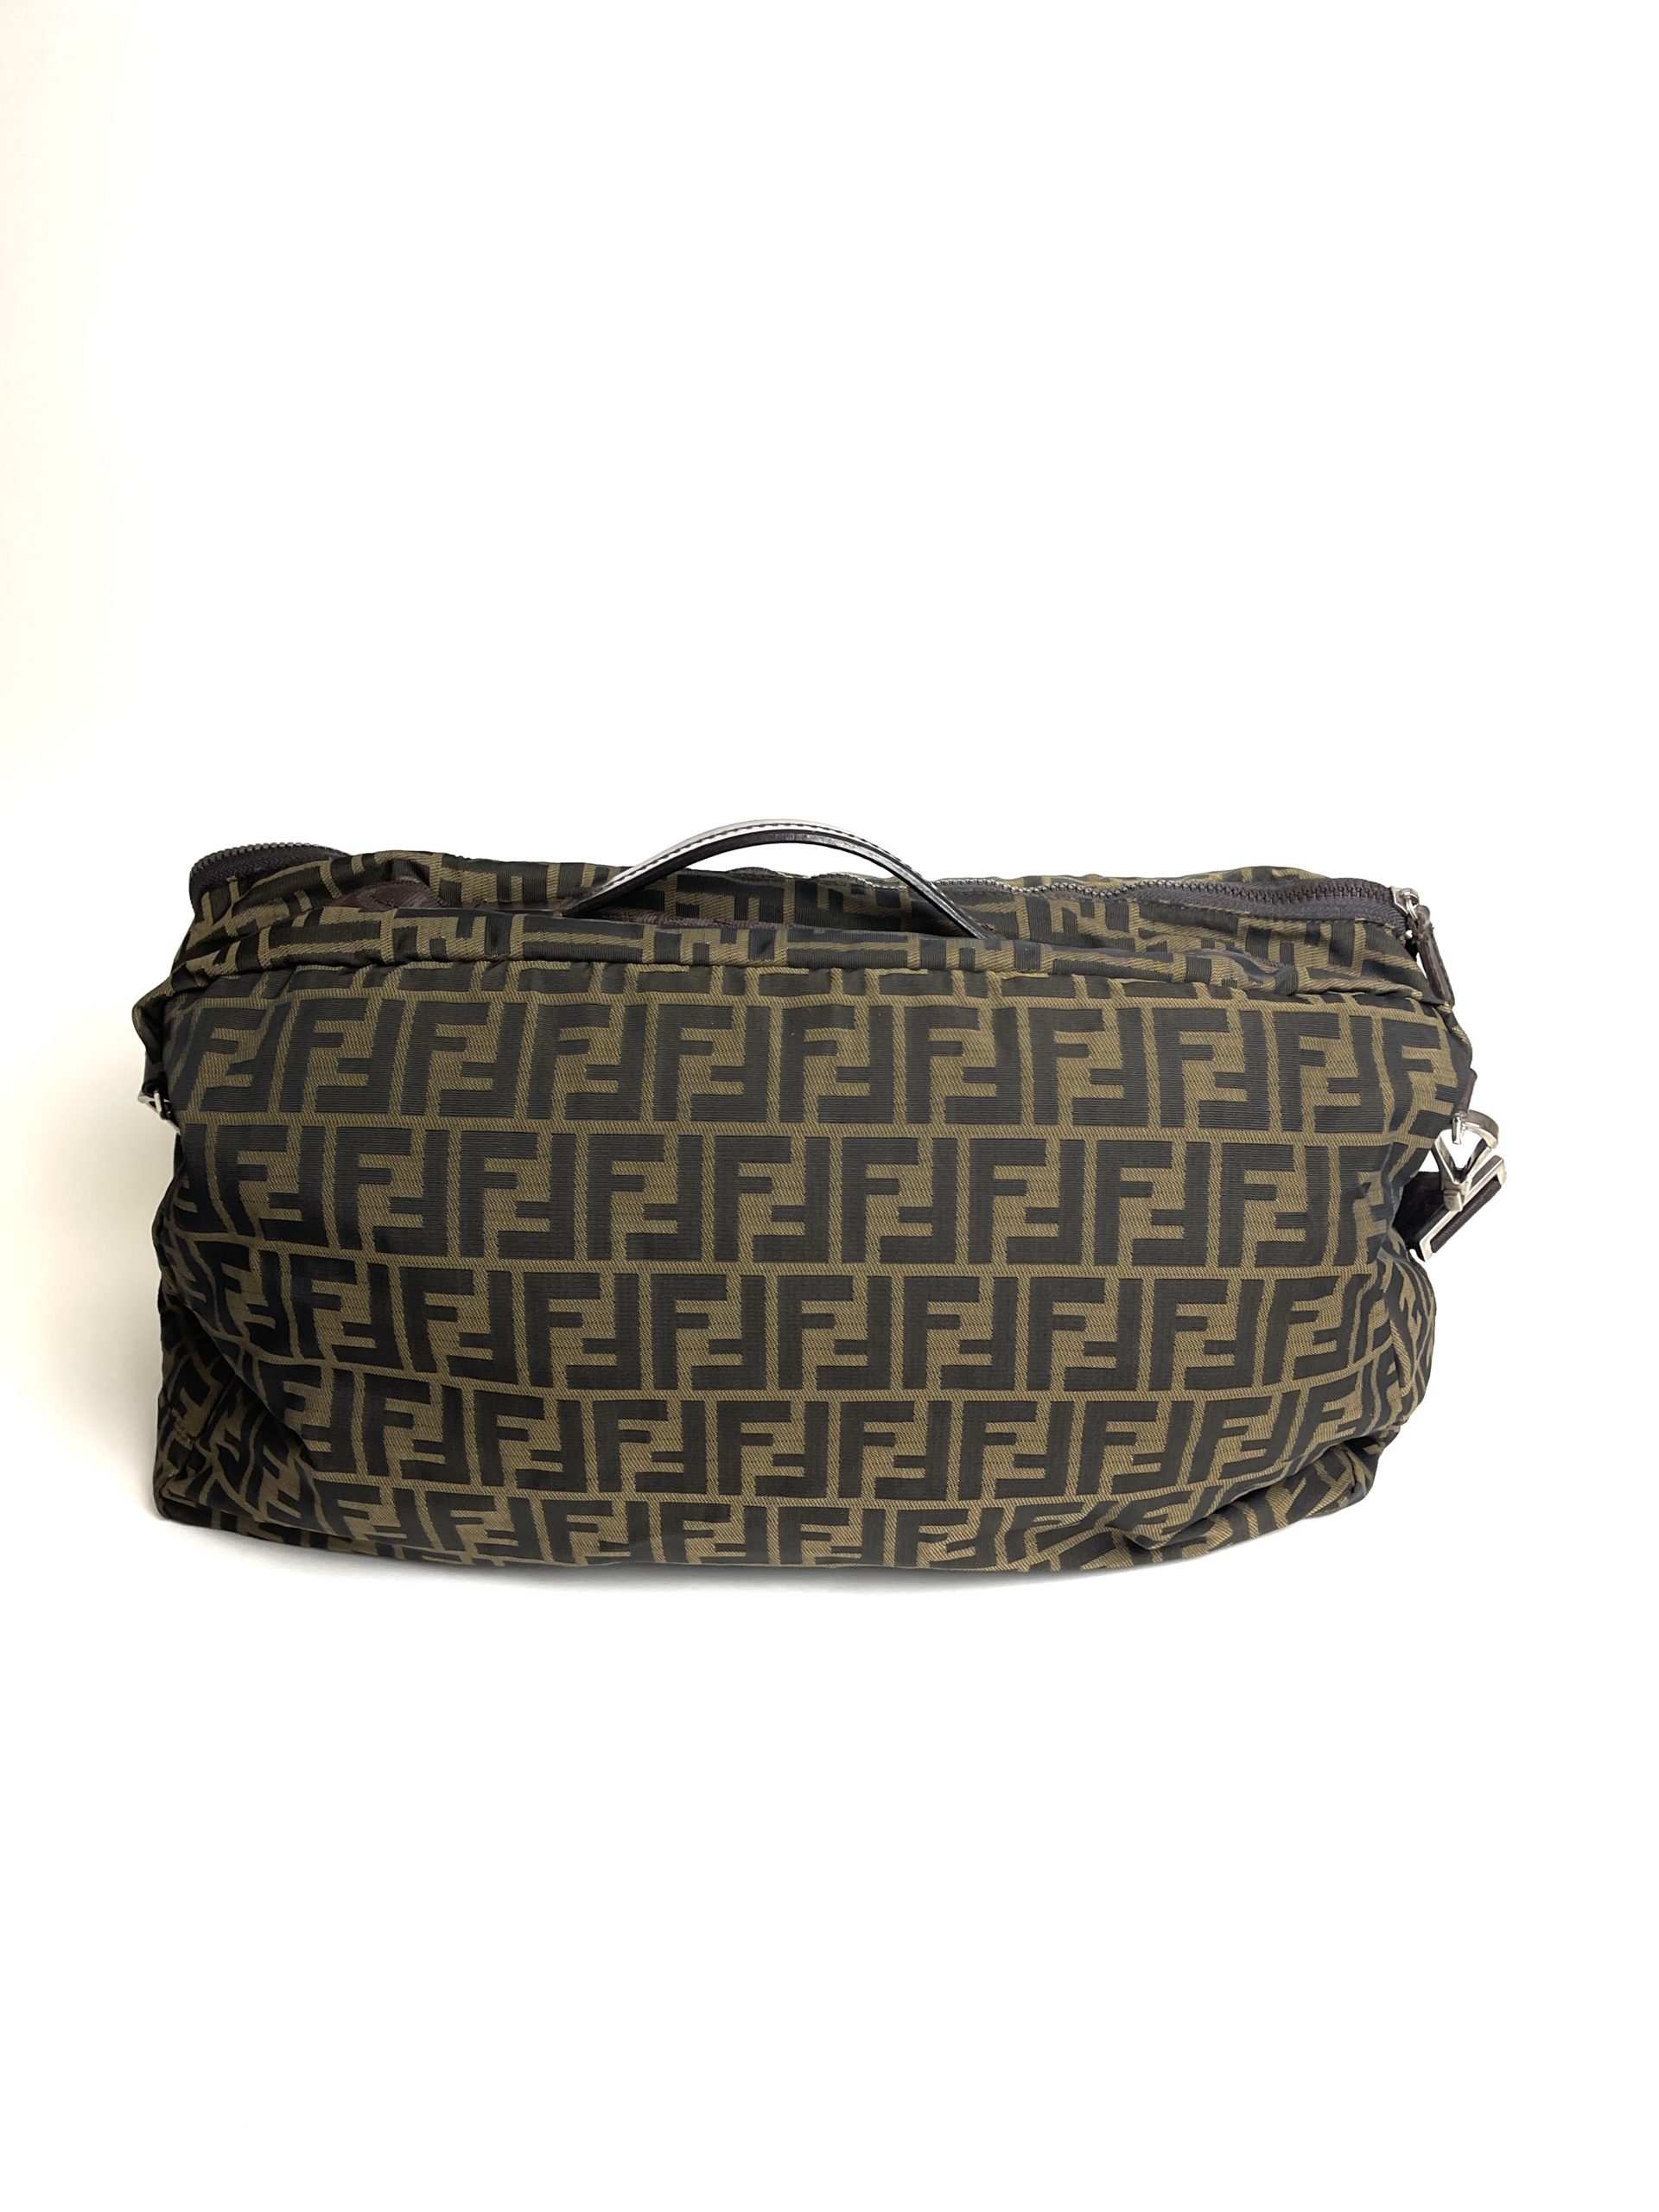 Fendi Large Tote Zucca Print double handles, Overnighter, Weekender Bag,  added strap